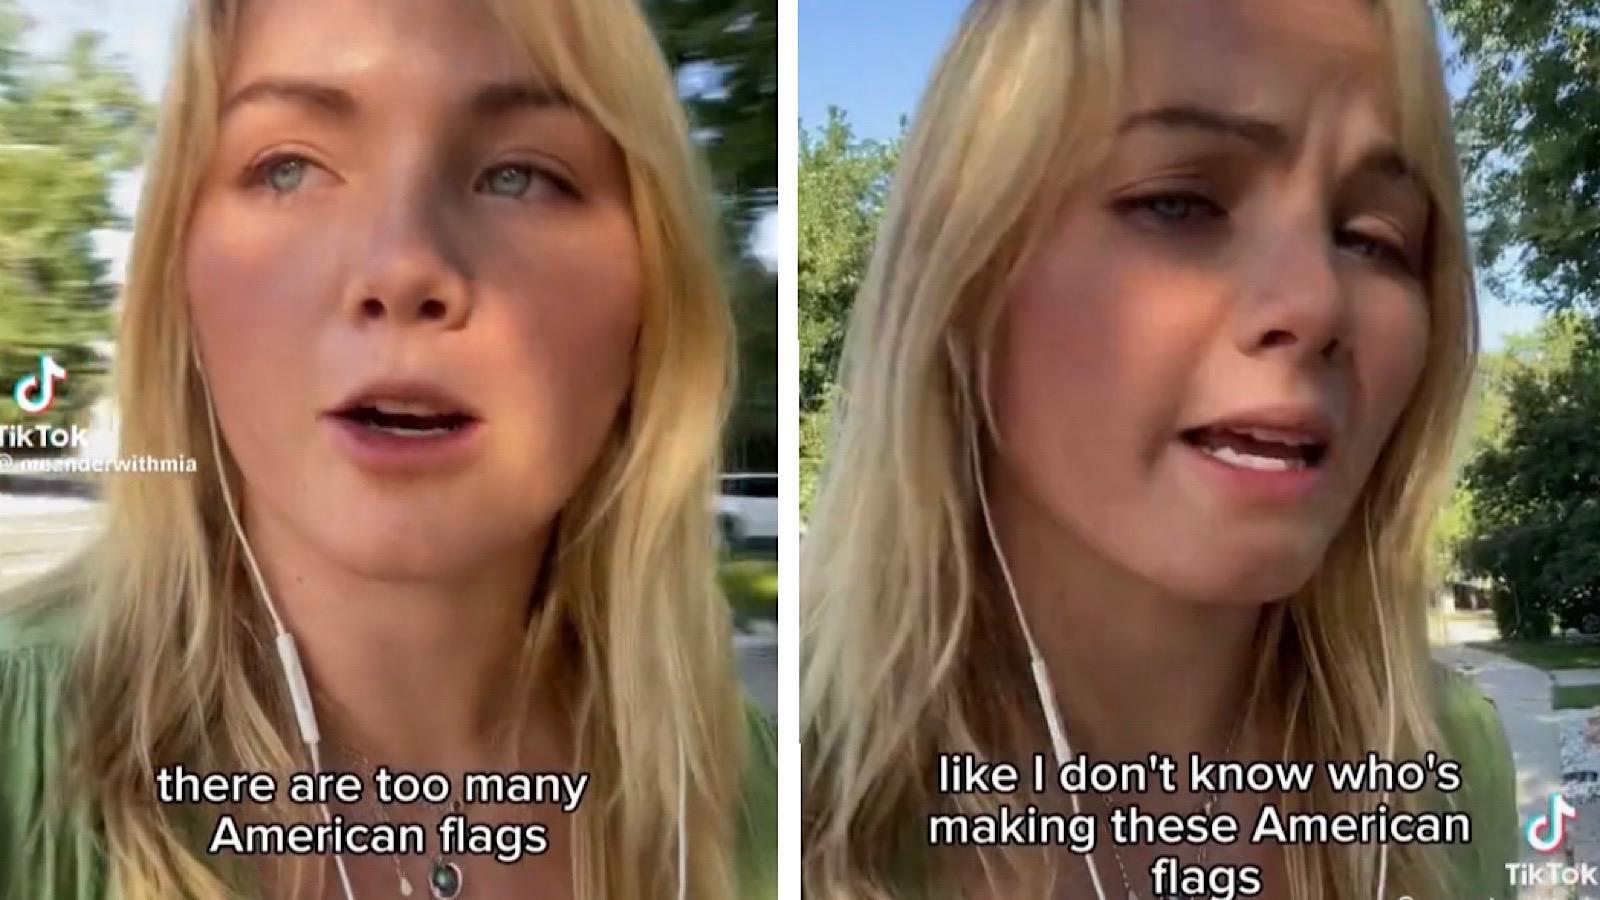 An Australian TikToker received backlash for dissing the amount of American flags she saw in America.